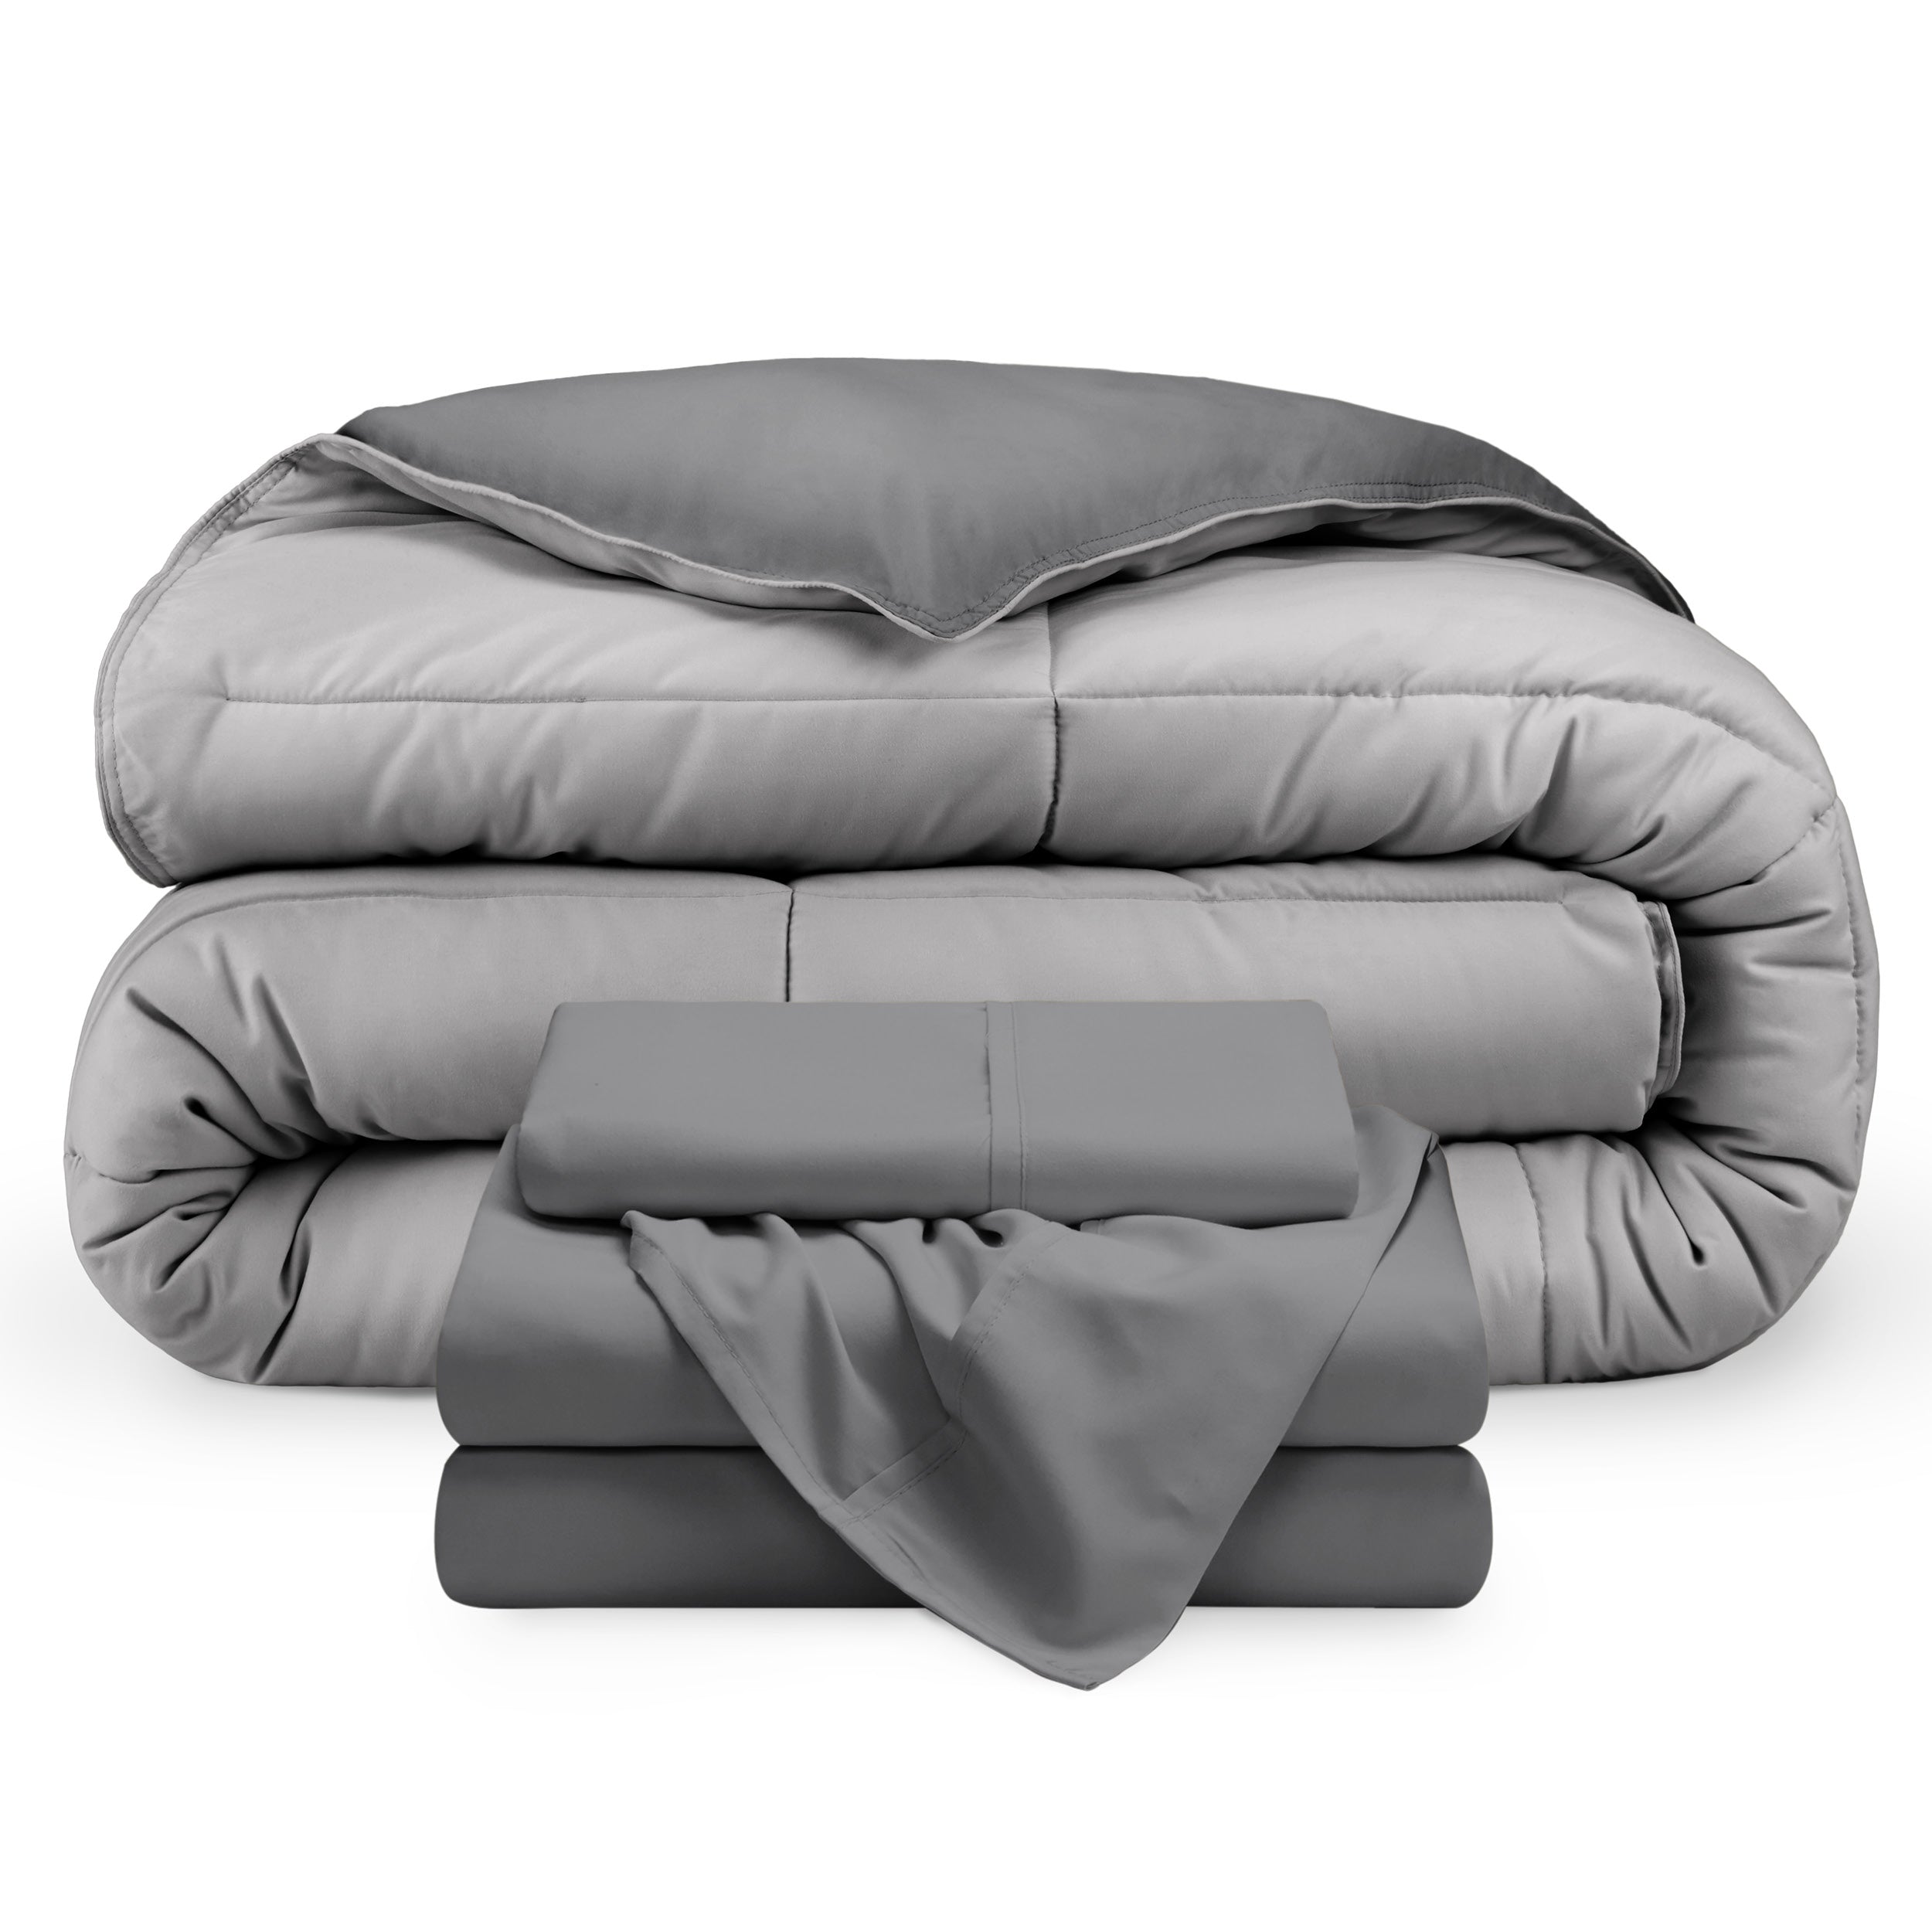 A reversible microfiber comforter and a coordinating sheet set folded and stacked 